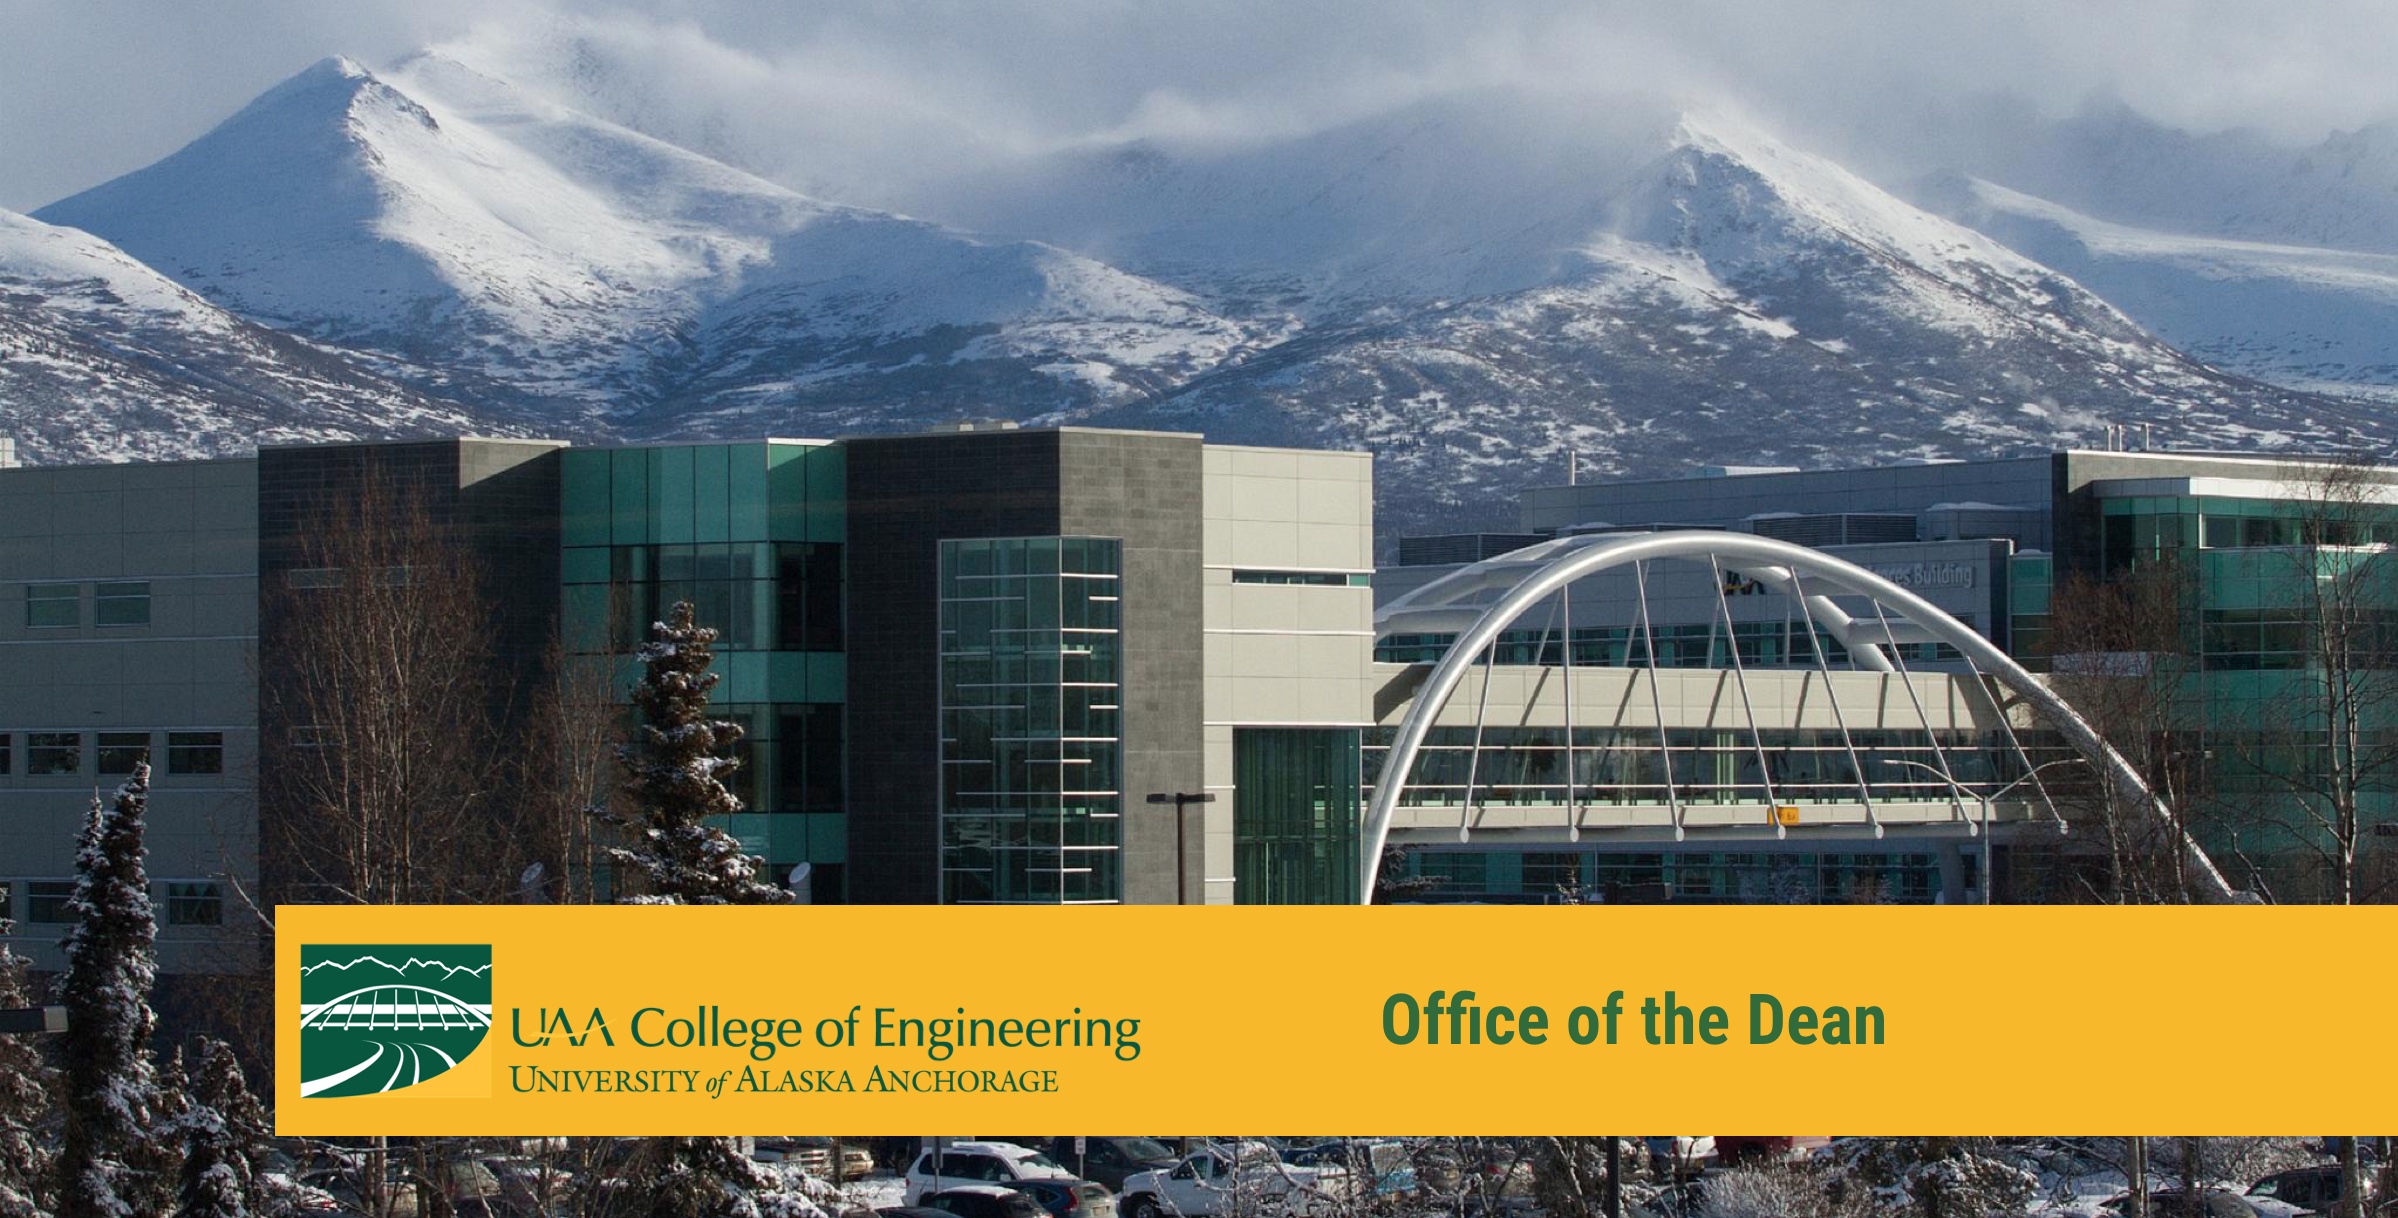 campus buildings with mountains in the background and header text for office of the dean